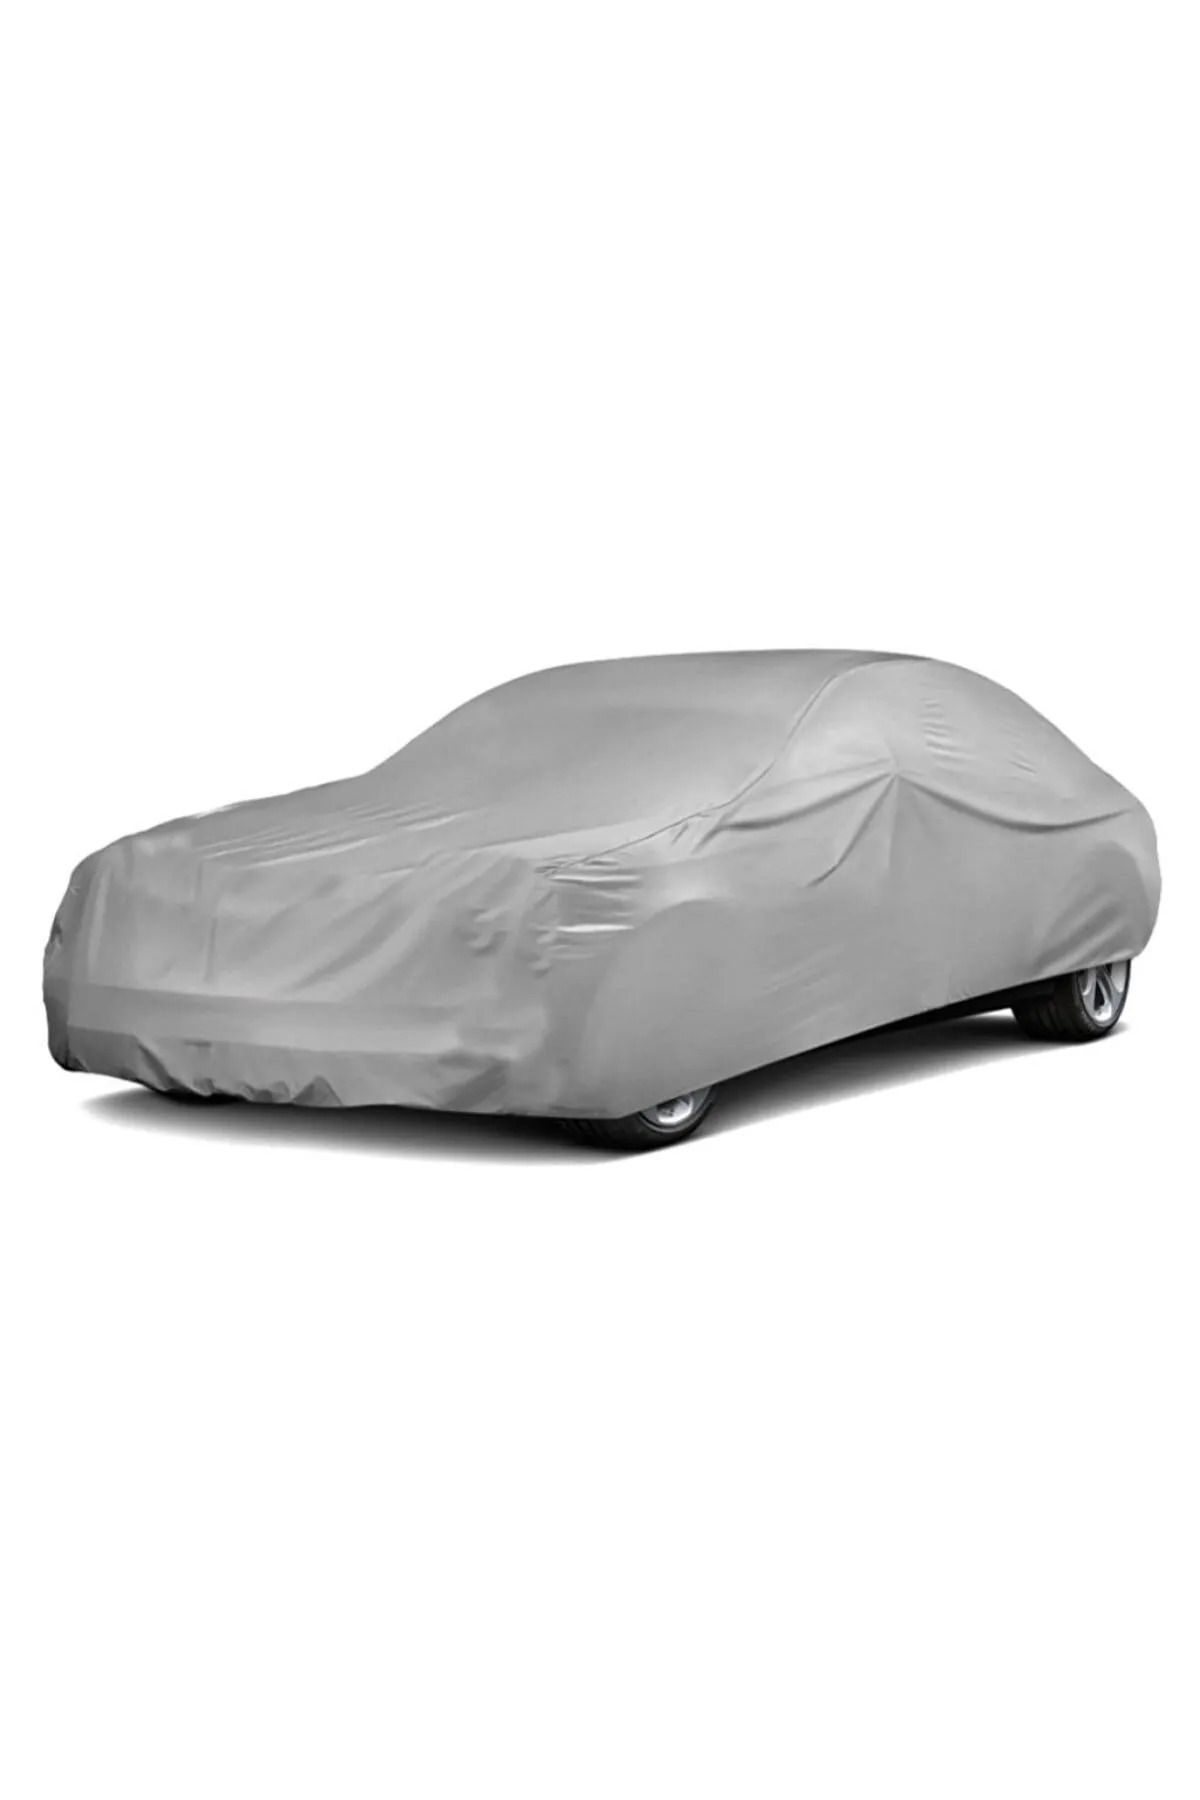 CADDY CAR COVERS - Cars Covers